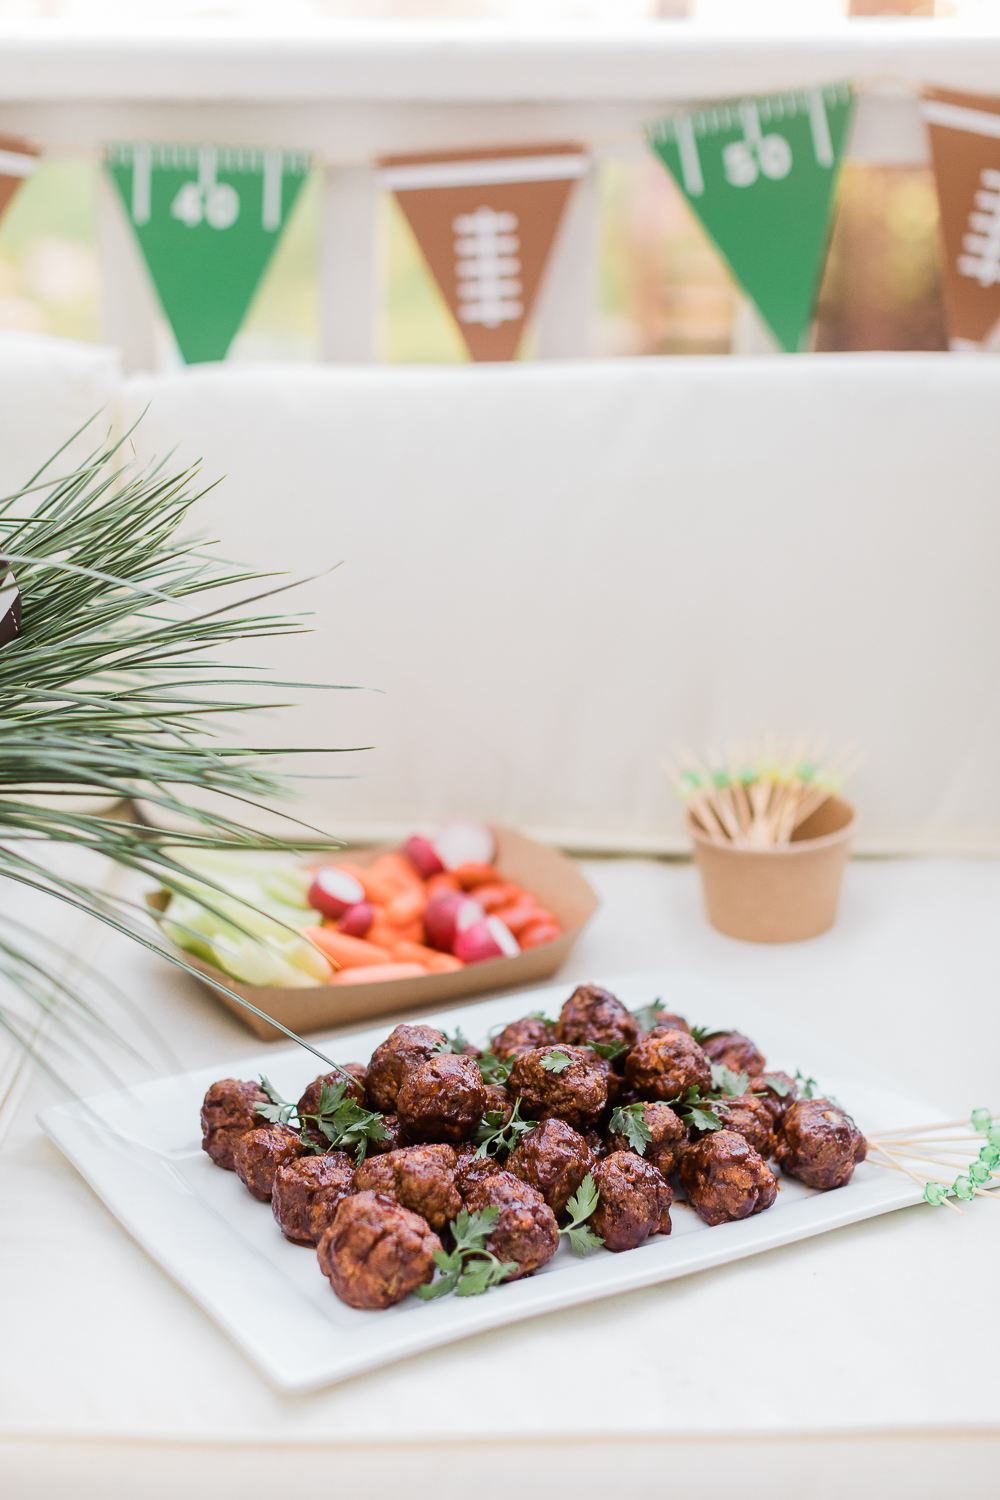 Blogger Stephanie Ziajka shares her recipe for baked meatballs in sauce on Diary of a Debutante